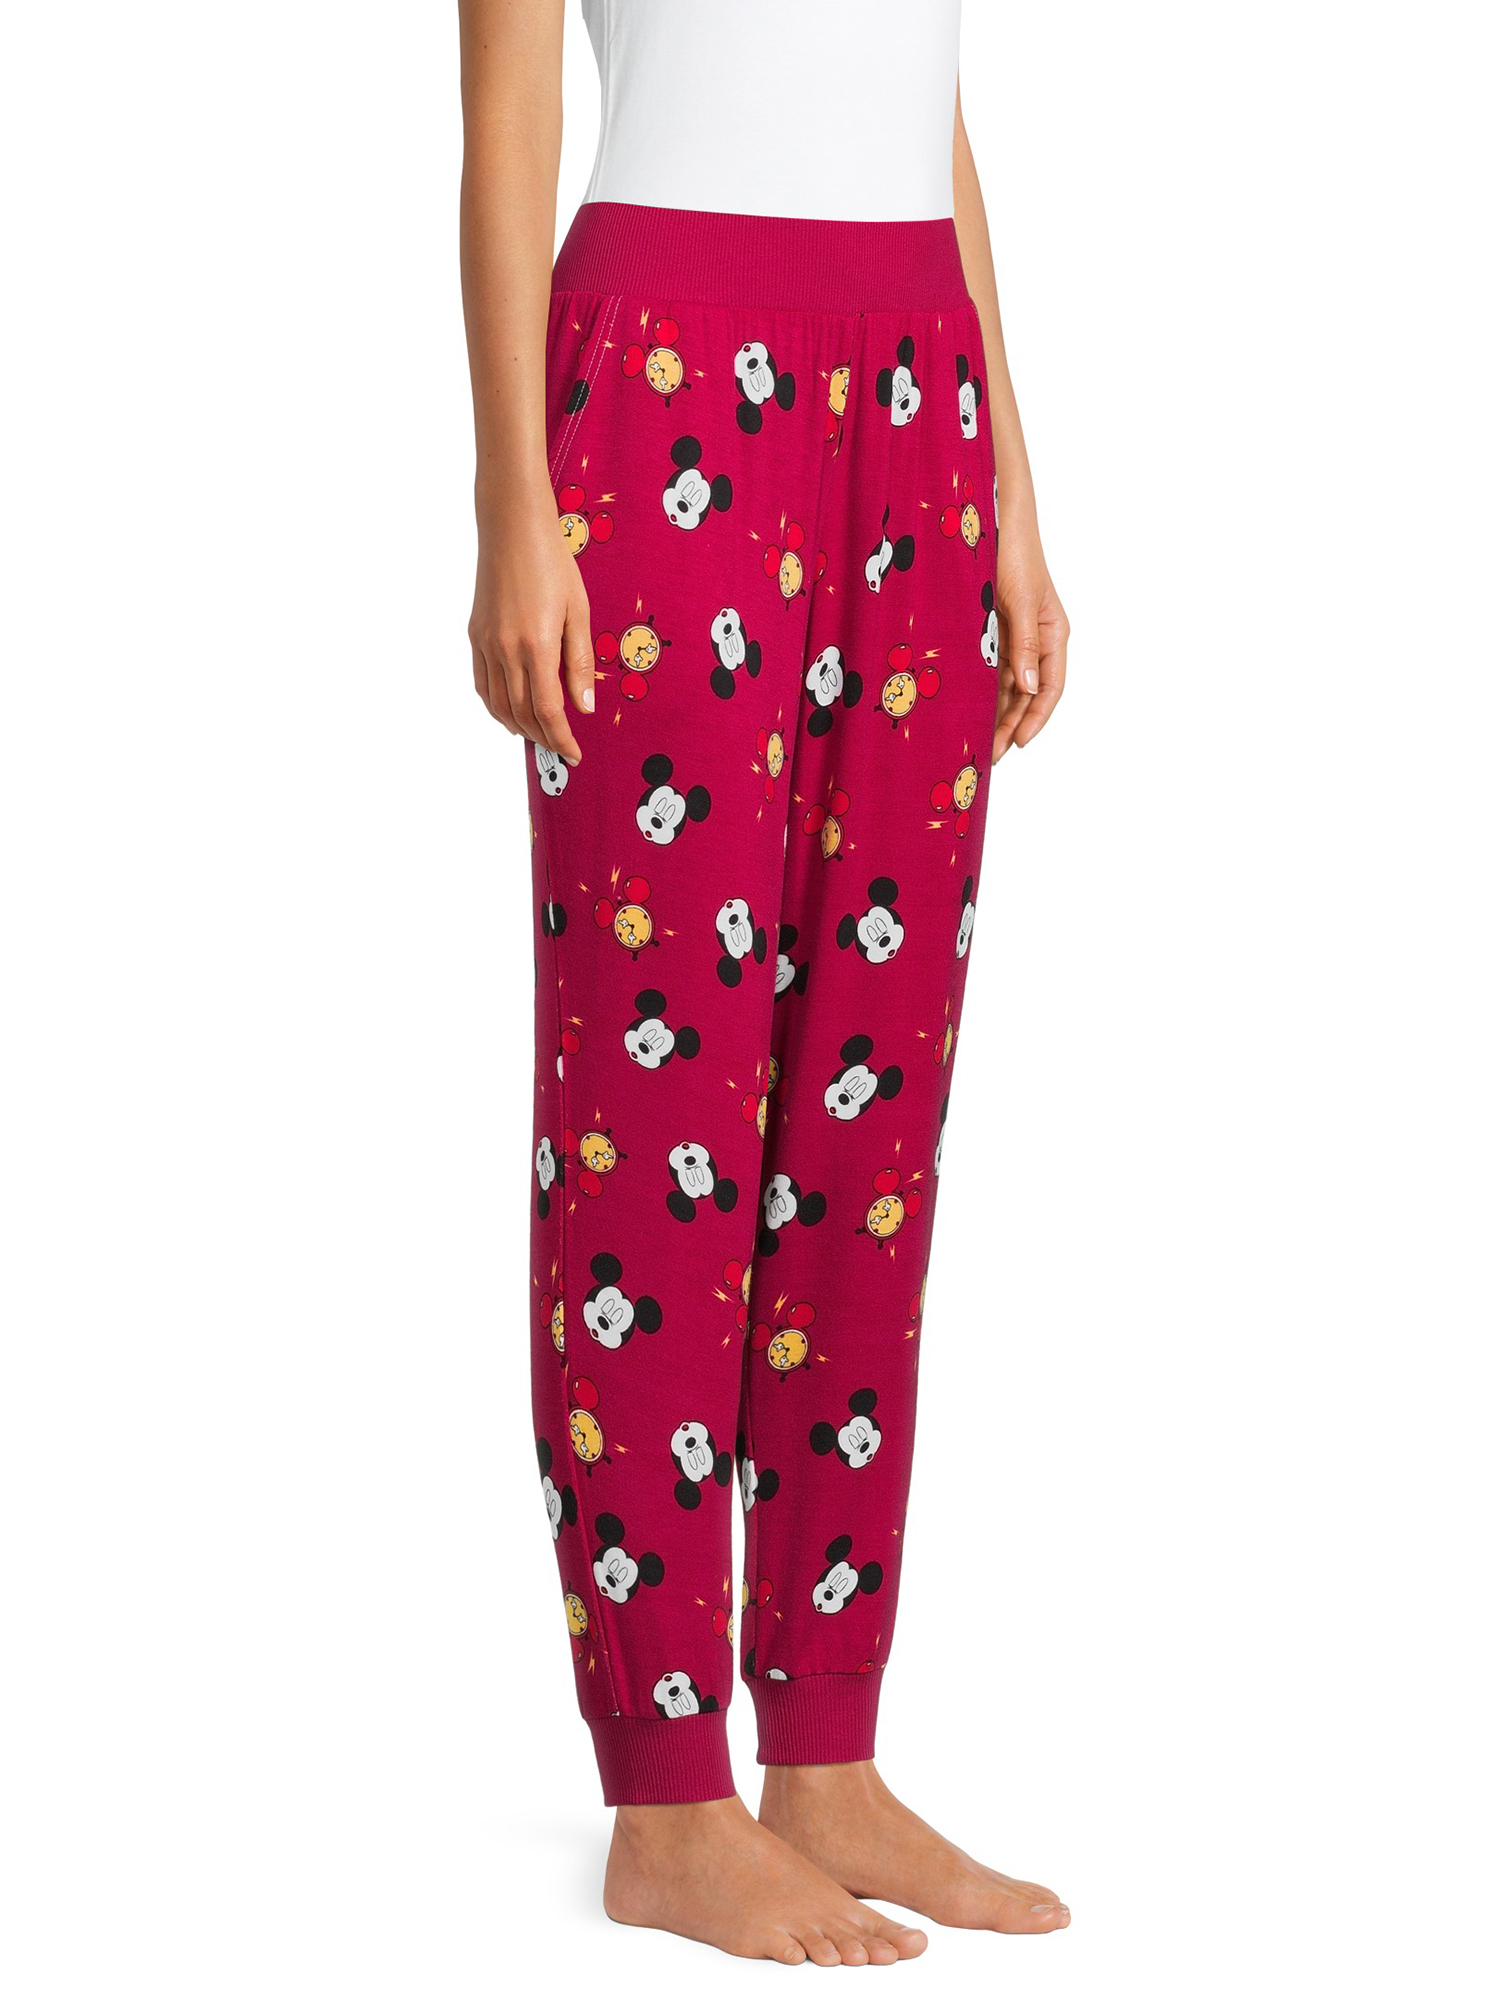 Disney Printed Breathable Easy Care Pajamas (Women's) 1 Pack - image 3 of 7